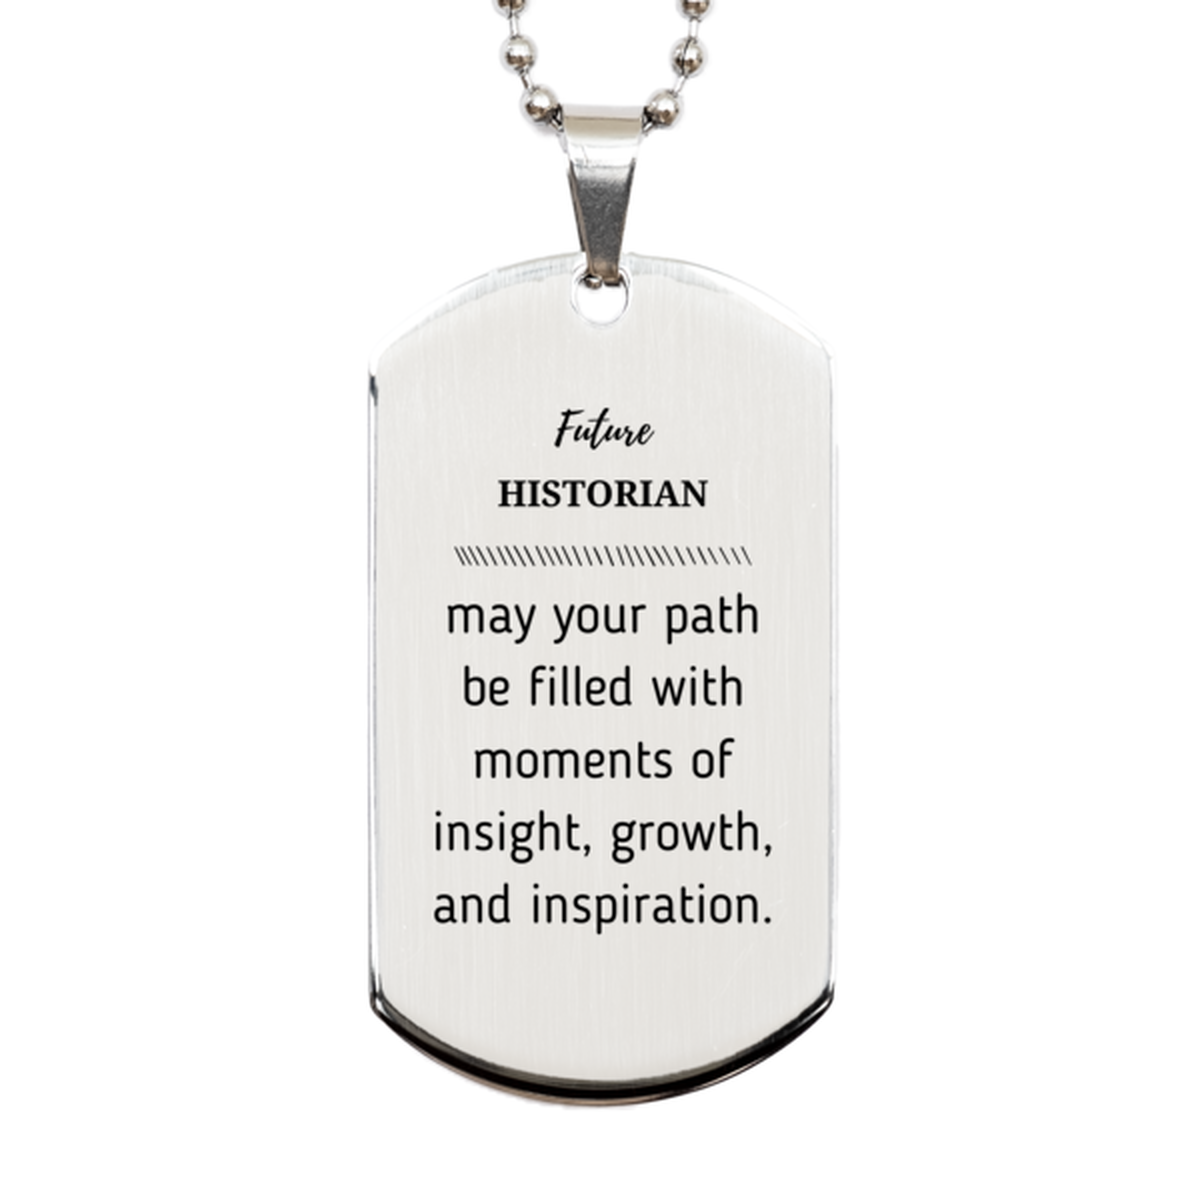 Future Historian Gifts, May your path be filled with moments of insight, Graduation Gifts for New Historian, Christmas Unique Silver Dog Tag For Men, Women, Friends